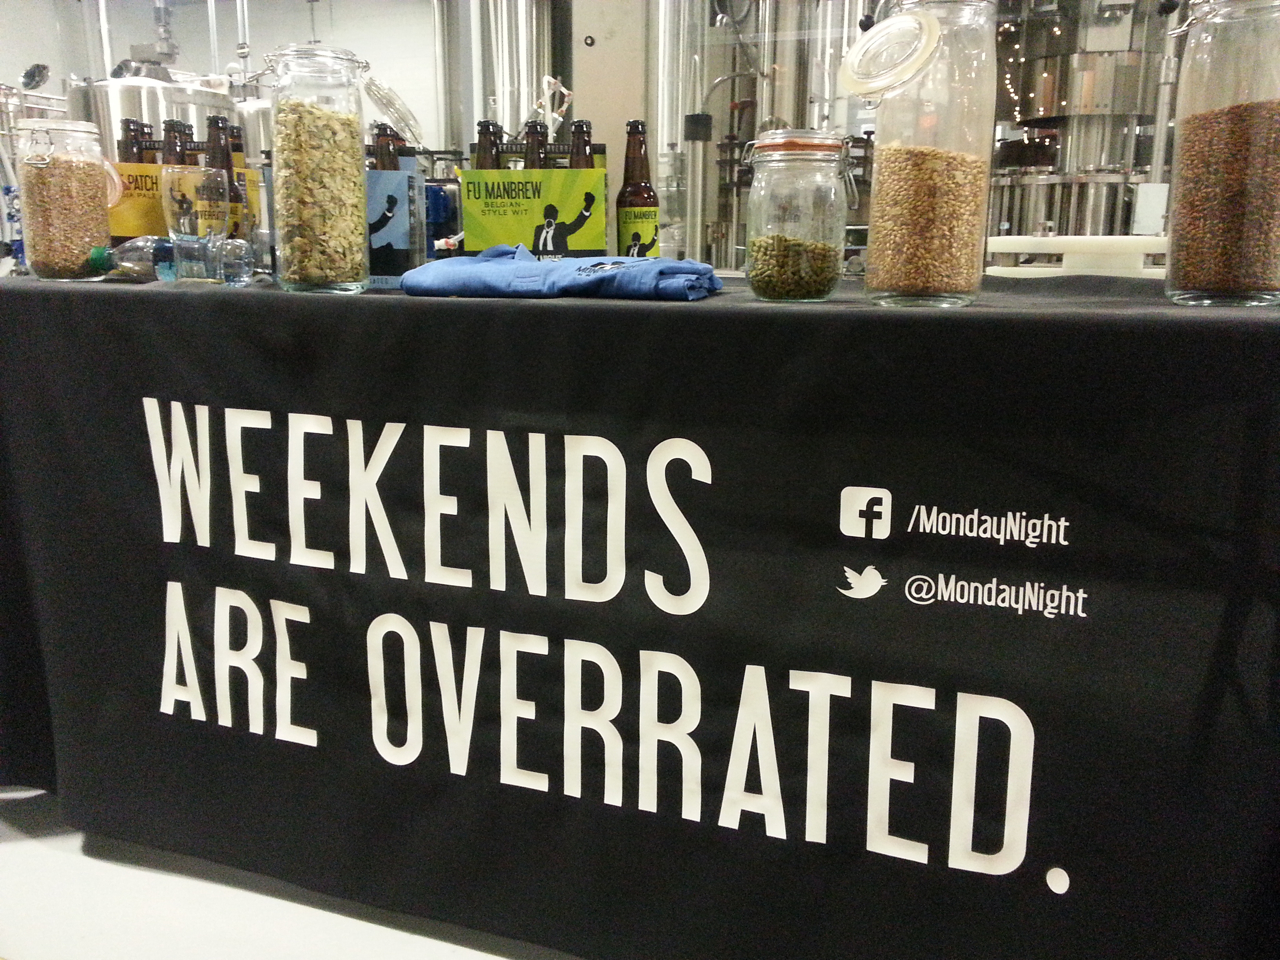 Weekends are overrated, monday night brewing, wm events, william fogler, wedding planning, corporate event planning, corporate events Atlanta, Atlanta event planners, Atlanta Event Design, Atlanta Event Venues, Atlanta Brewery, 